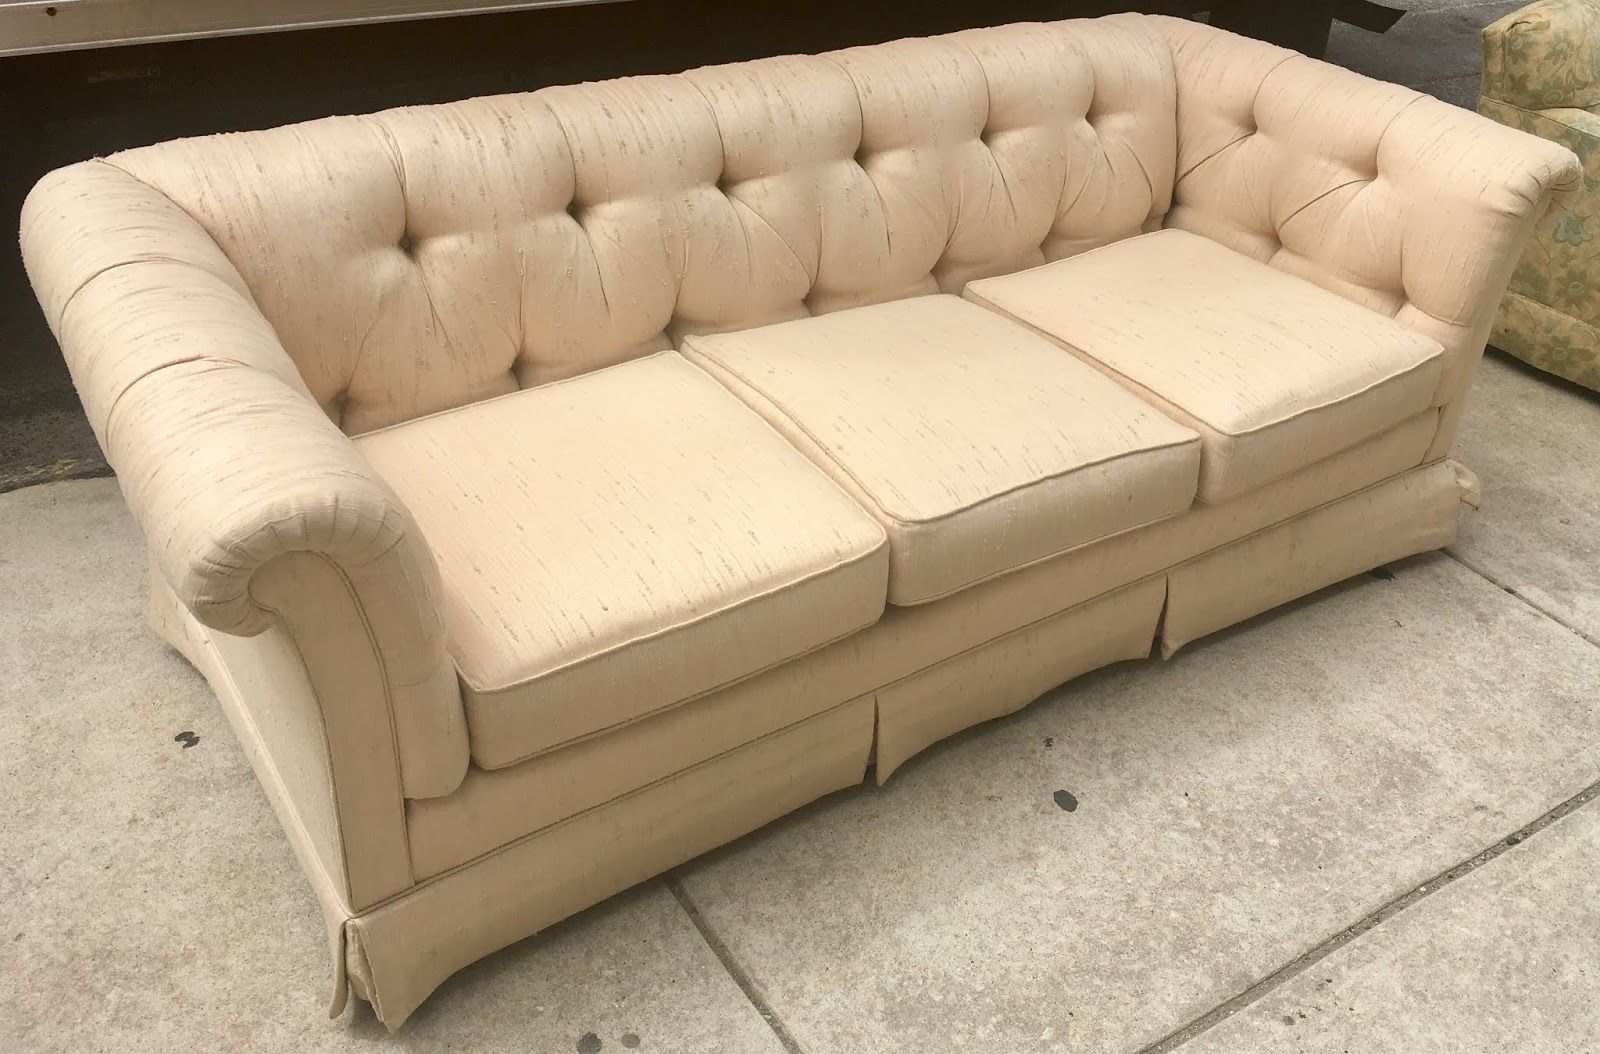 Recent Uhuru Furniture & Collectibles: Beige Sofa With Tufted Throughout Ecru And Otter Coffee Tables (View 1 of 20)